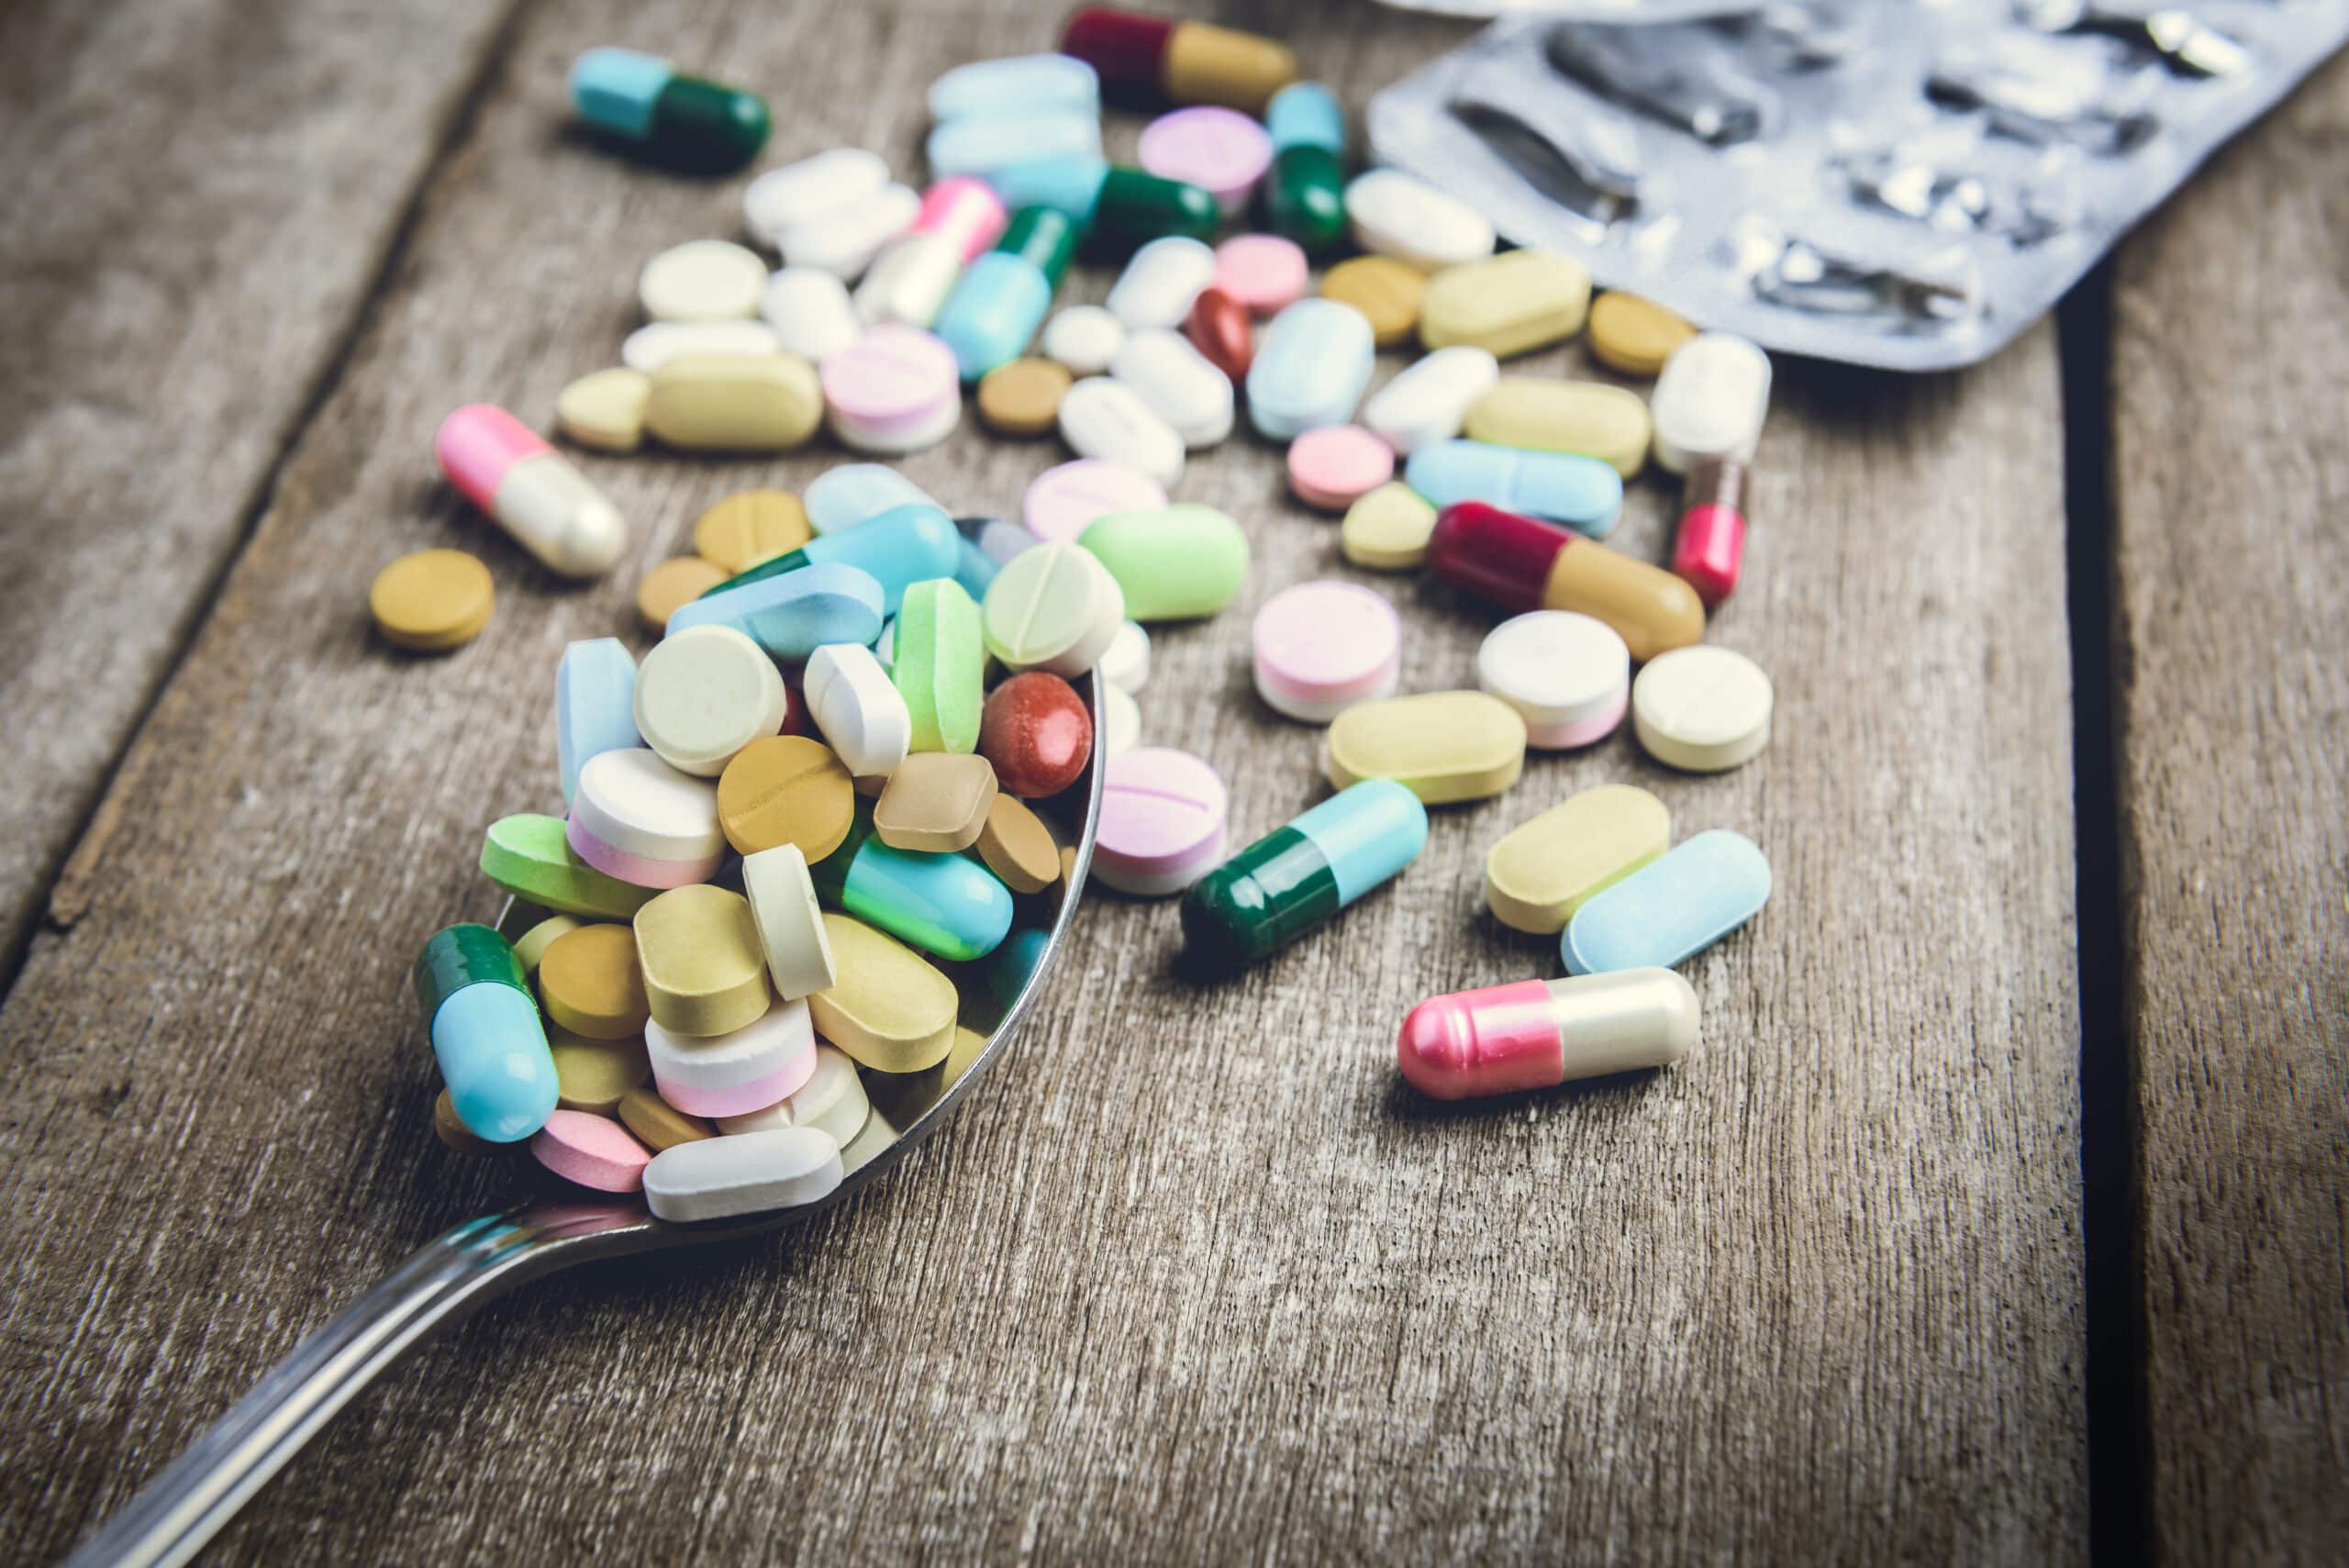 Why is Prescription Drug Abuse Common?